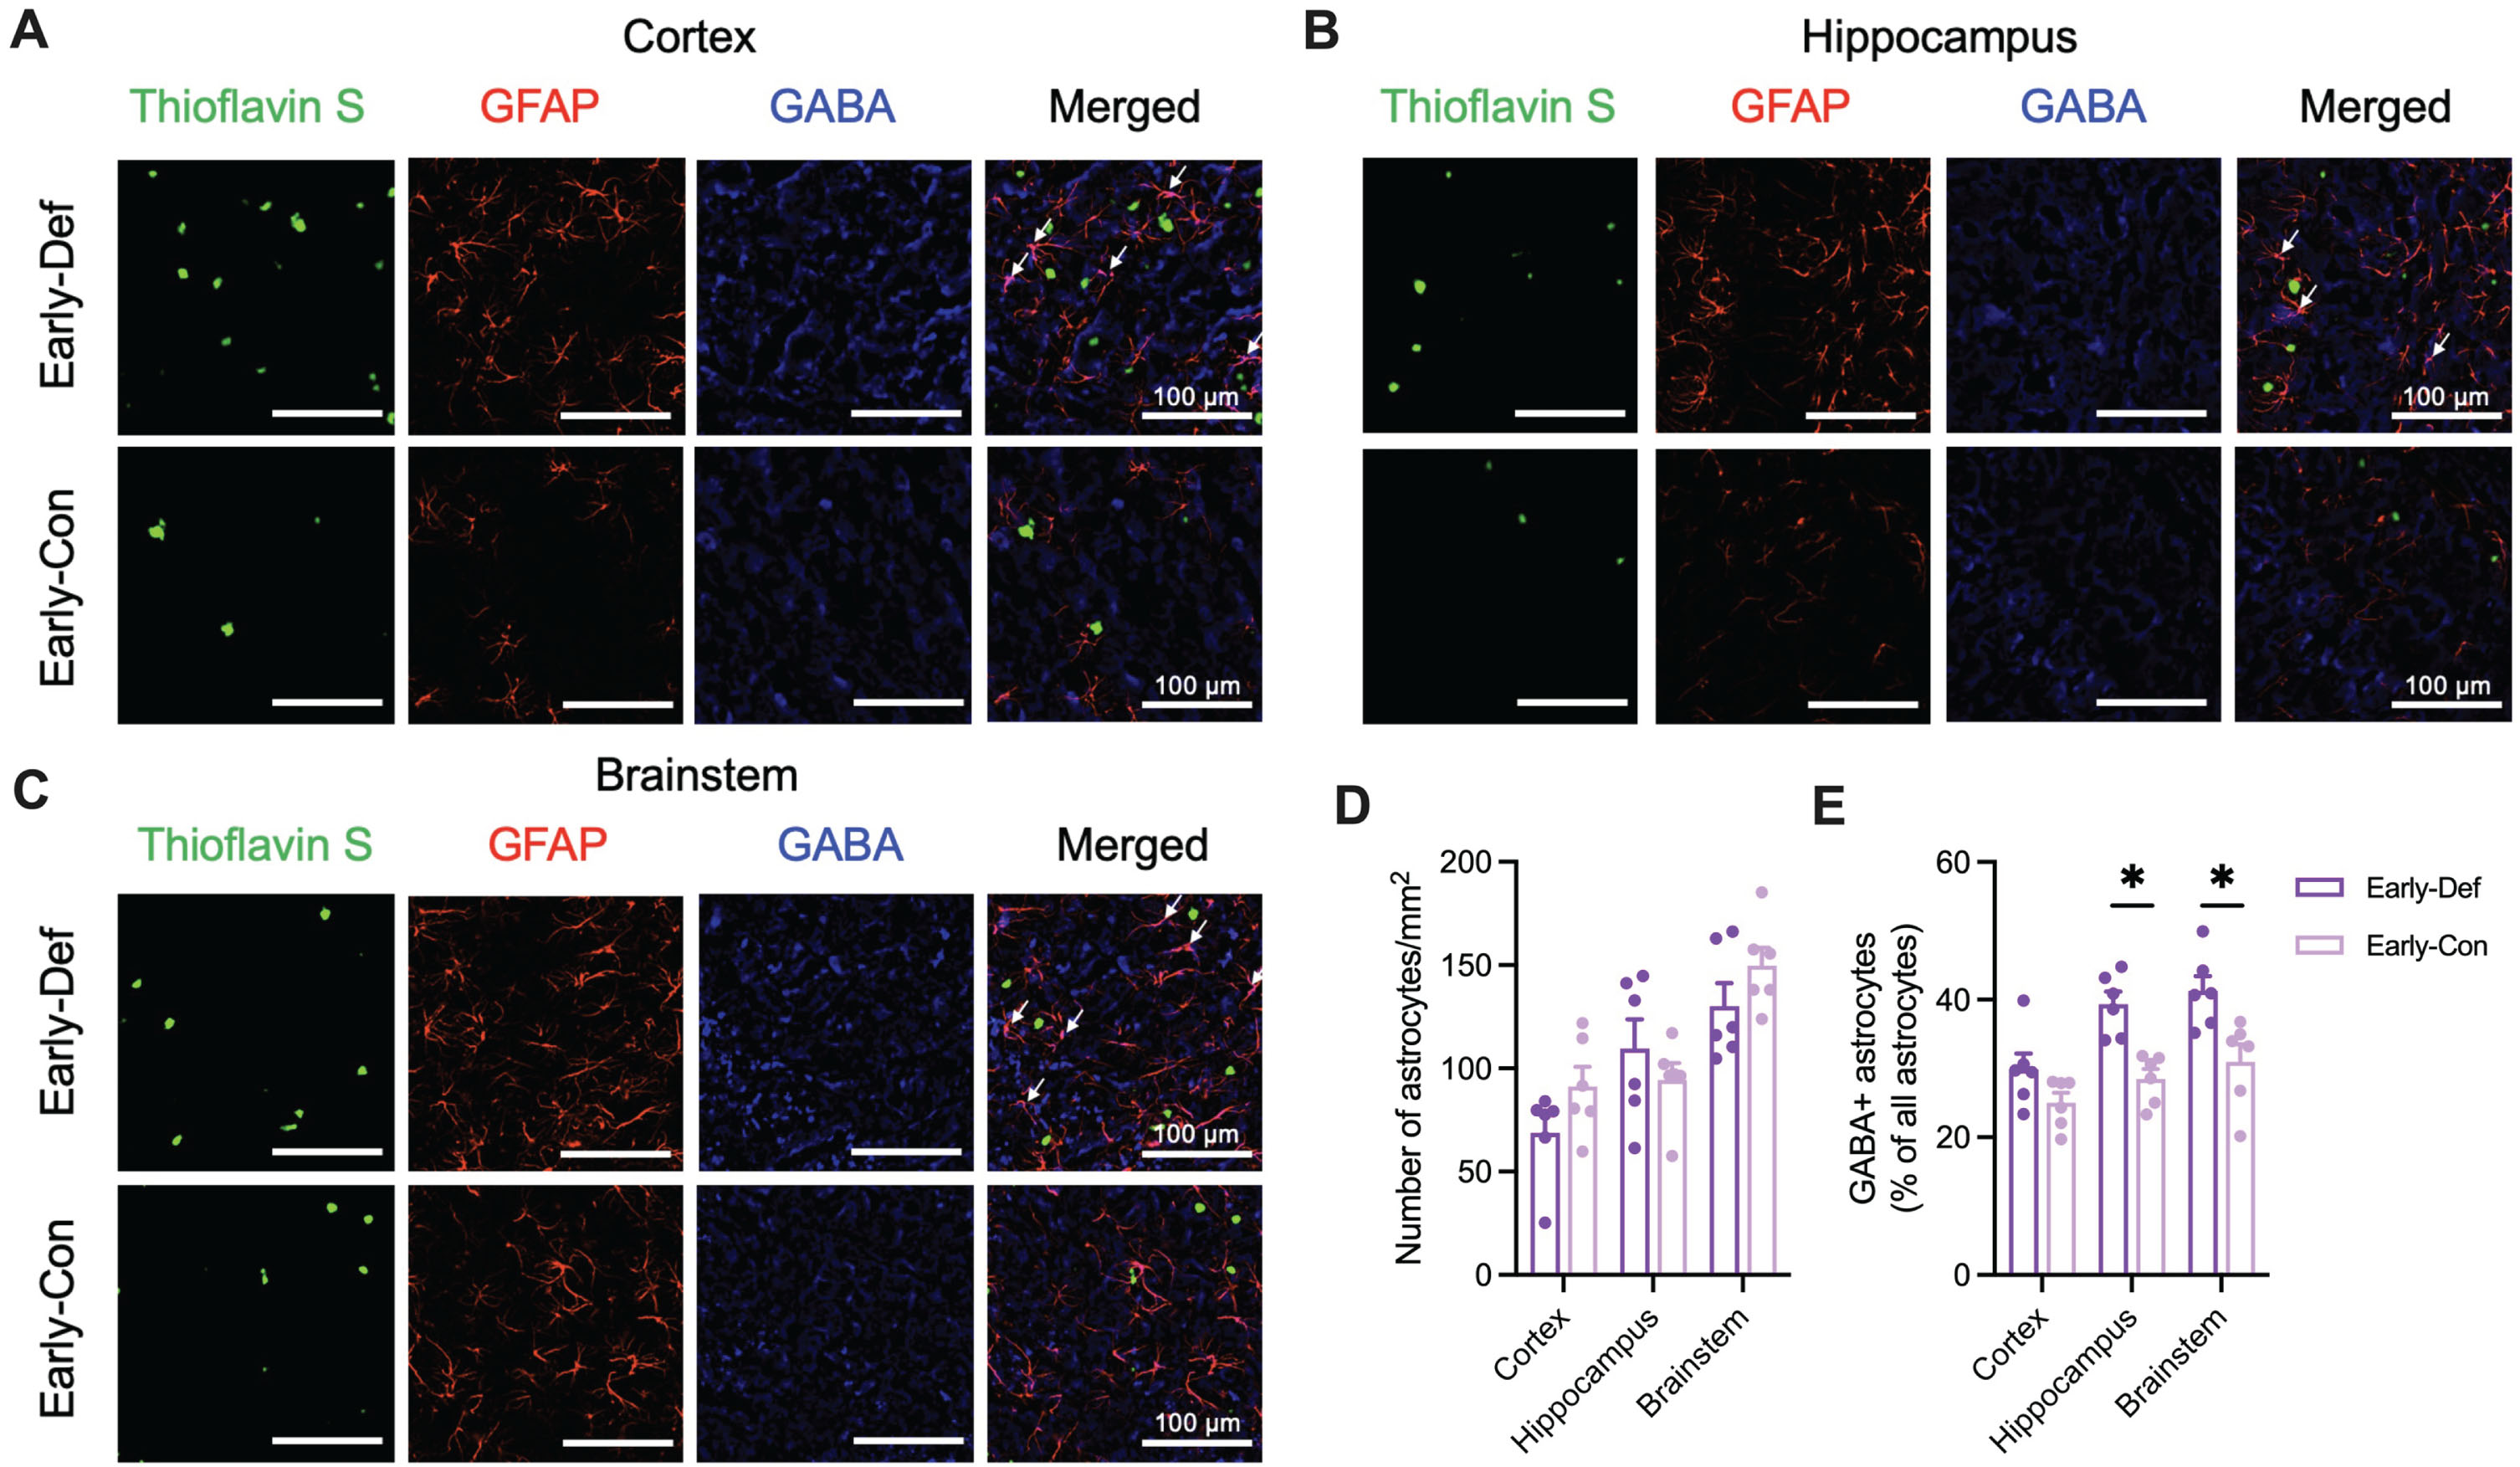 Vitamin D deficiency showed increased GABA-positive reactive astrocytes in the early phase of 5XFAD mice. A) Representative image of cortical Aβ plaques (Thioflavin S; Green), astrocytes (GFAP; Red), and GABA (Blue) in the primary motor cortex (Scale bar, 100μm) of Early-Def and Early-Def groups. There is colocalization between GFAP and GABA (white arrows). B) Representative images of Aβ plaques, astrocytes, and GABA in the hippocampus of two groups. There is colocalization between GFAP and GABA (white arrows). C) Representative images of Aβ plaques, astrocytes, and GABA in the nucleus tractus solitarius of two groups. There is colocalization between GFAP and GABA (white arrows). D) The number of astrocytes (GFAP + cells) per unit area in the cortex, hippocampus, and brainstem. E) Colocalization of GABA-positive astrocytes in the cortex, hippocampus, and brainstem. Data are presented as mean±SEM. *p < 0.05 by Student’s t-test or Mann-Whitney test. Aβ, amyloid-β; GFAP, glial fibrillary acidic protein; GABA, gamma-aminobutyric acid.